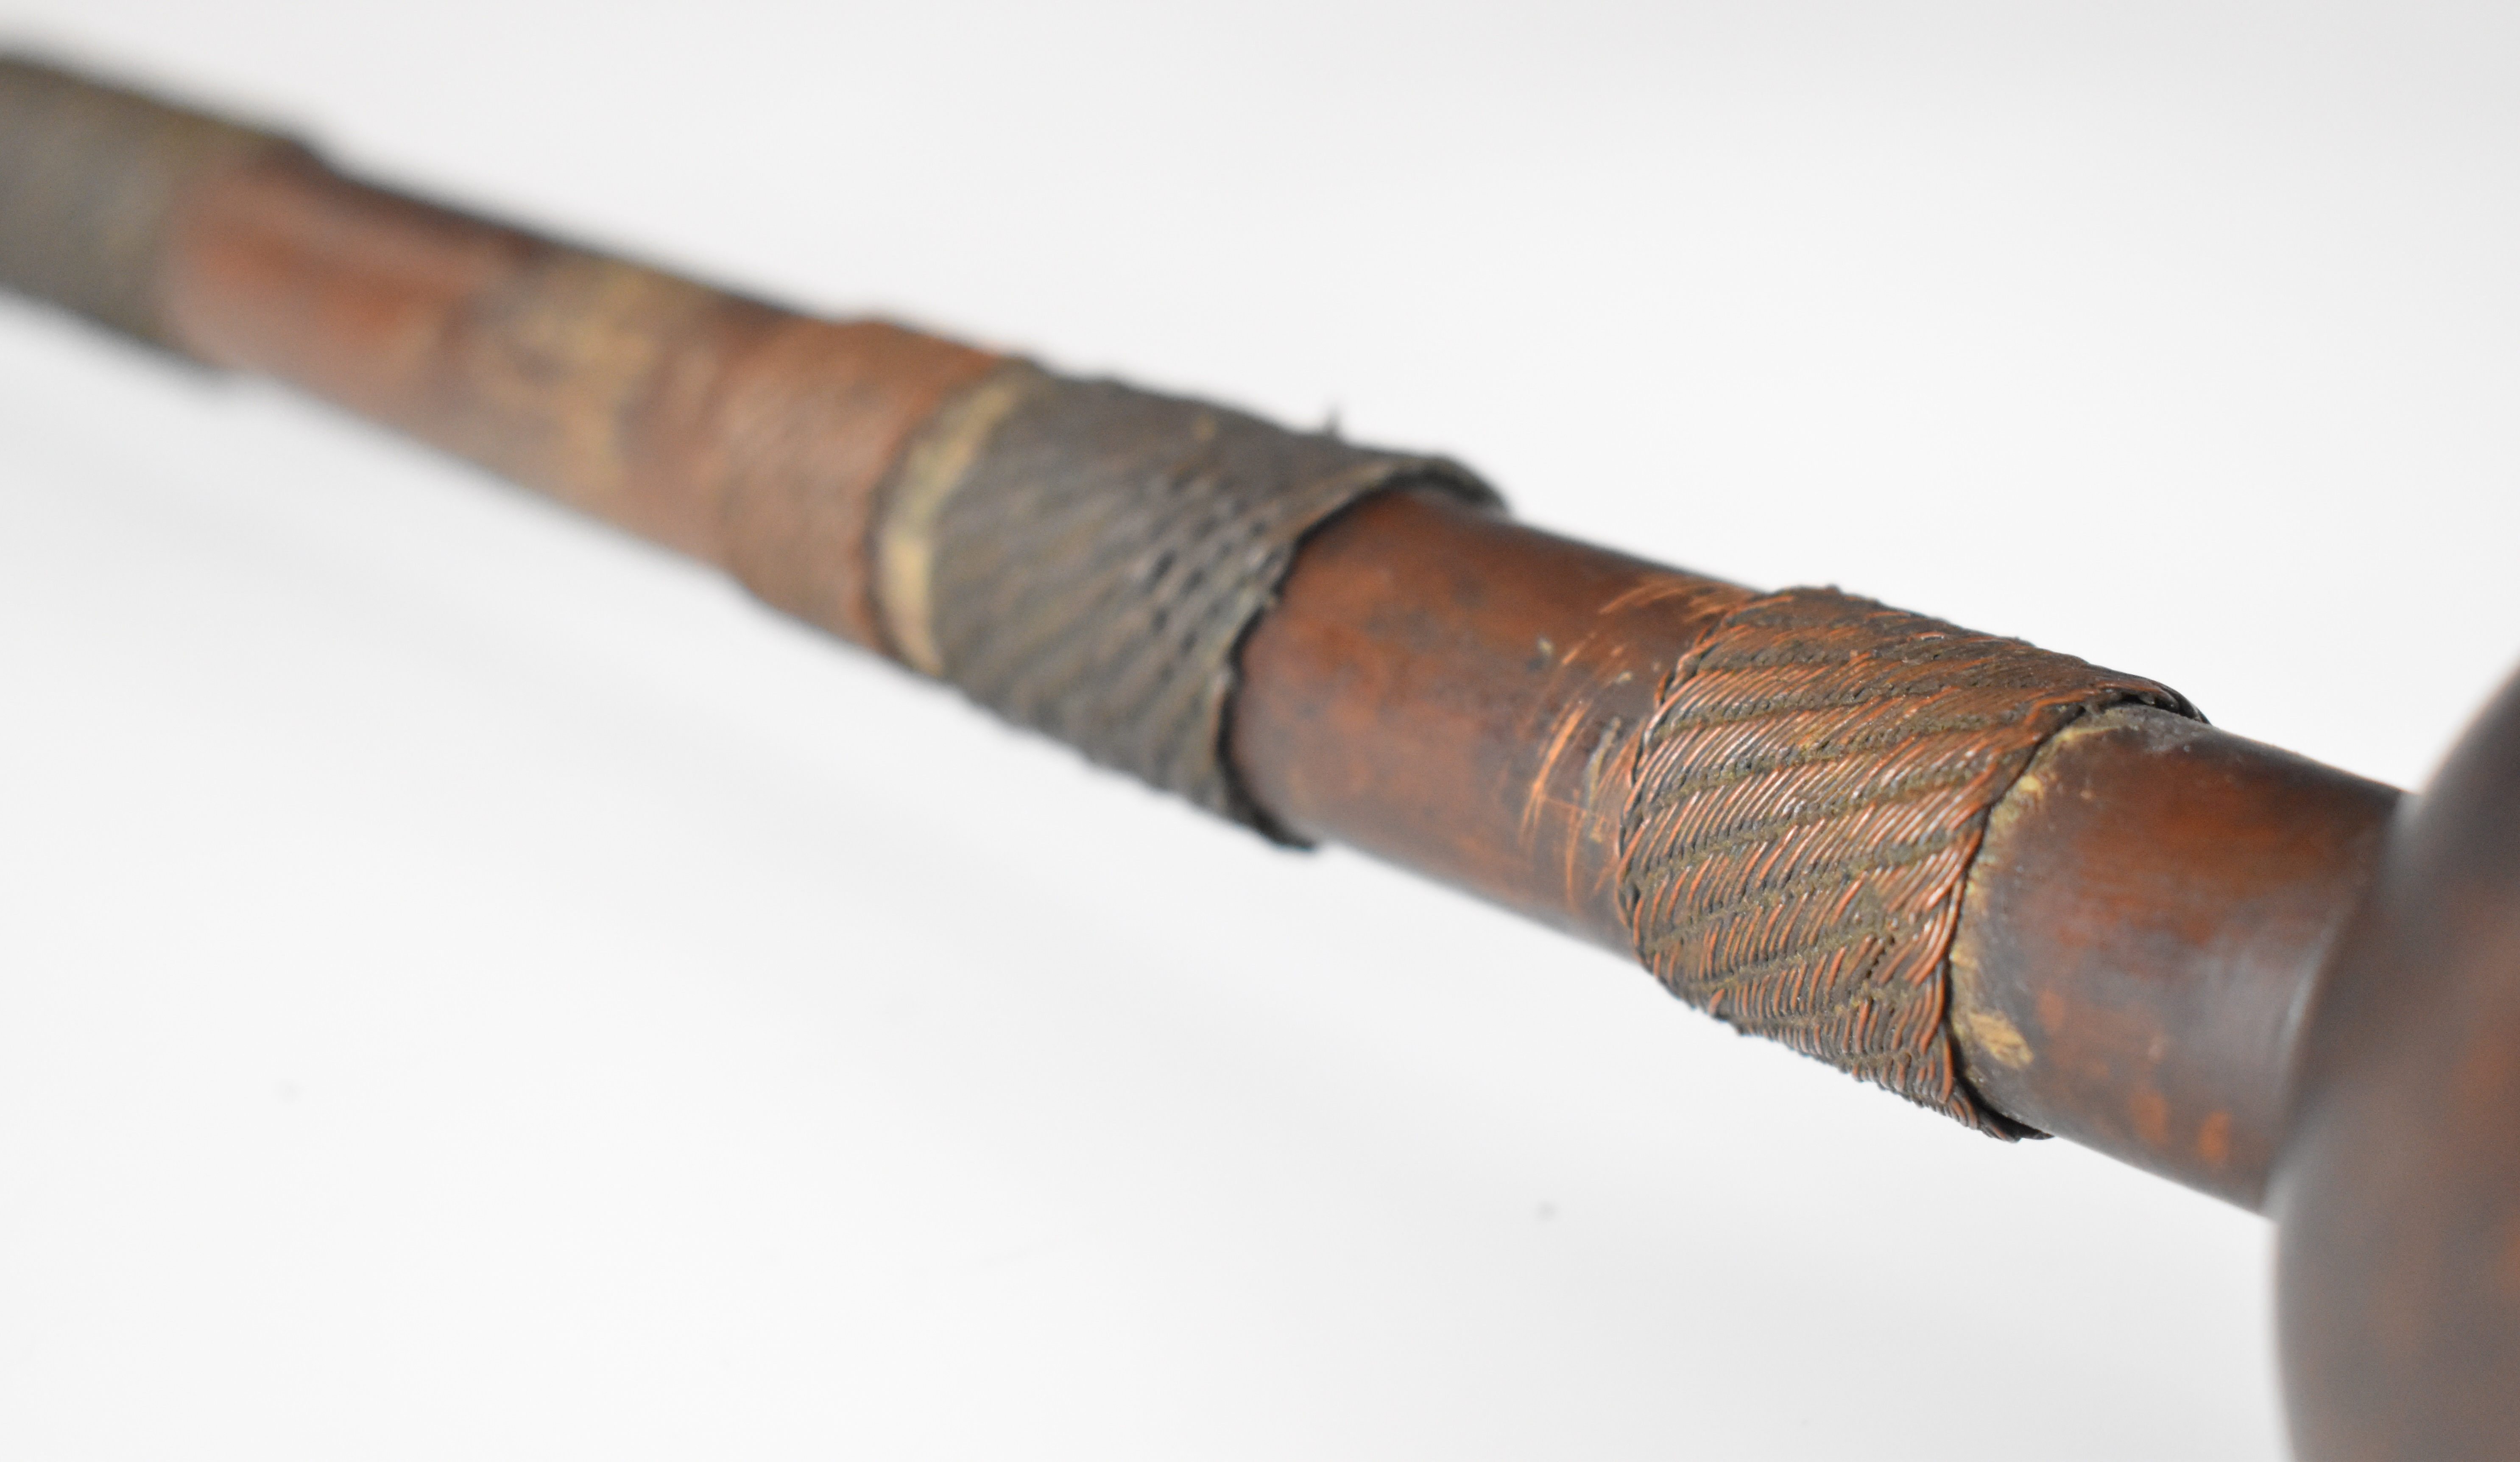 19thC African tribal knobkerrie with woven wire grips, 63cm long. - Image 3 of 4